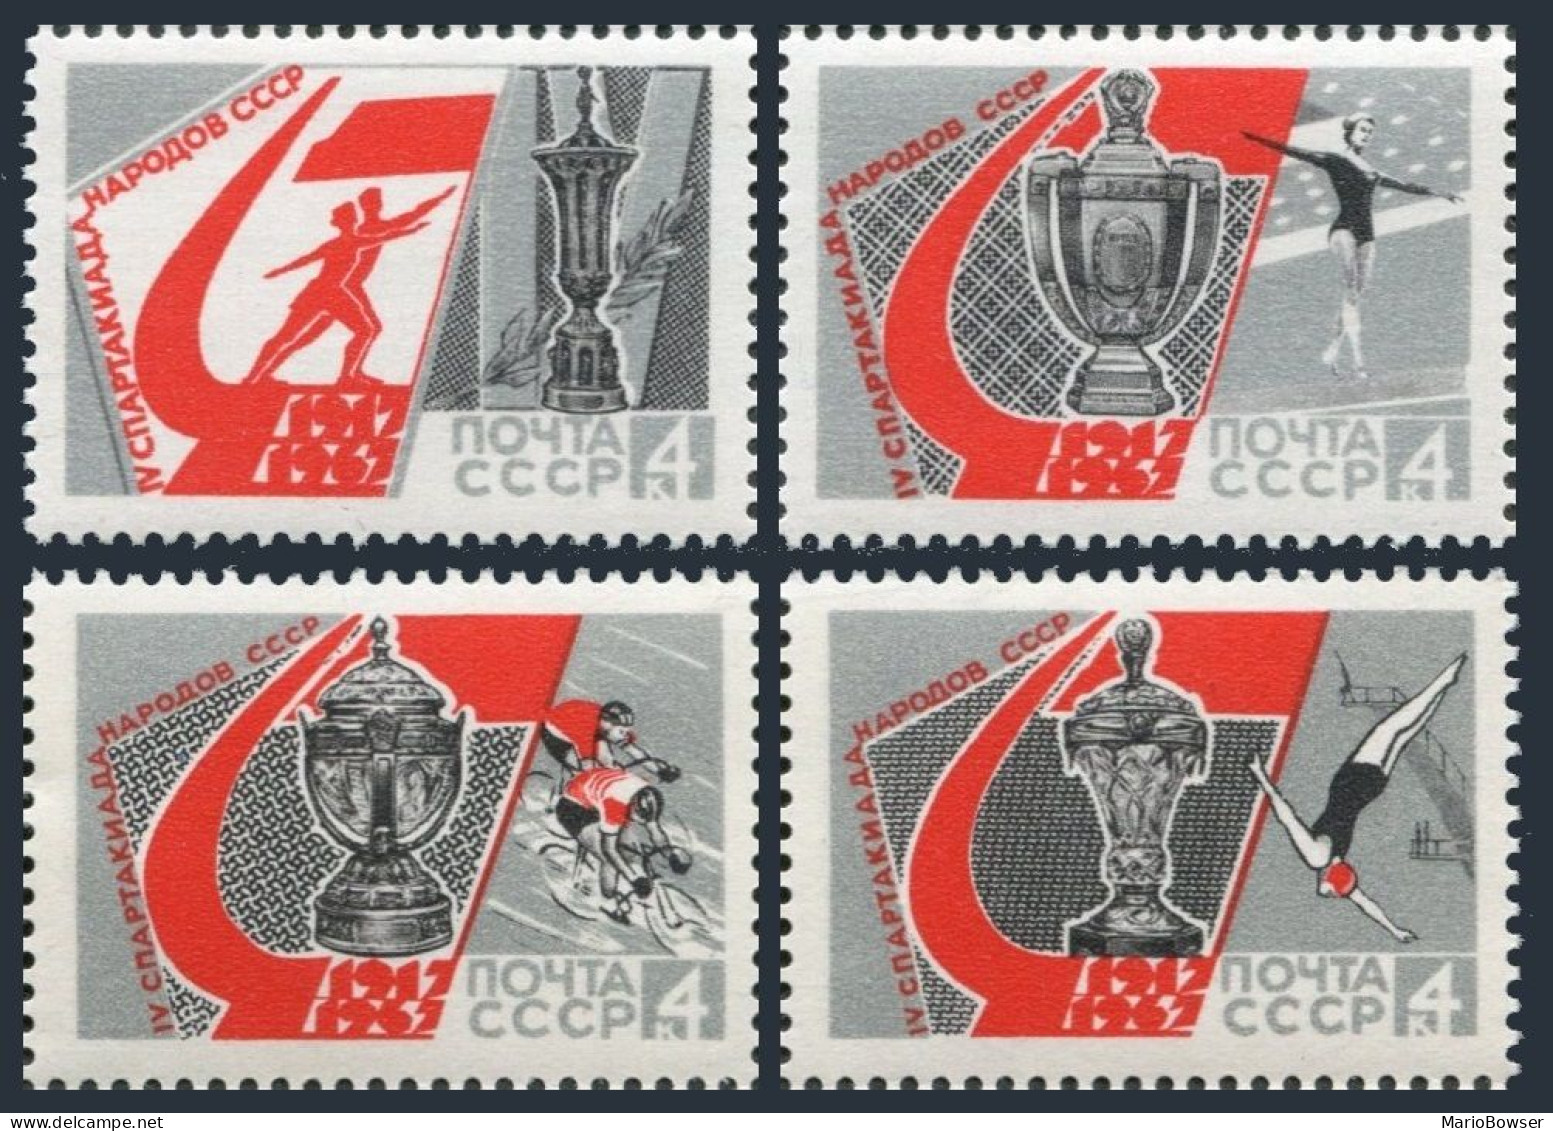 Russia 3337-3340a Pairs, MNH. Michel 3357-3360. Spartacist Games, 1967. - Neufs